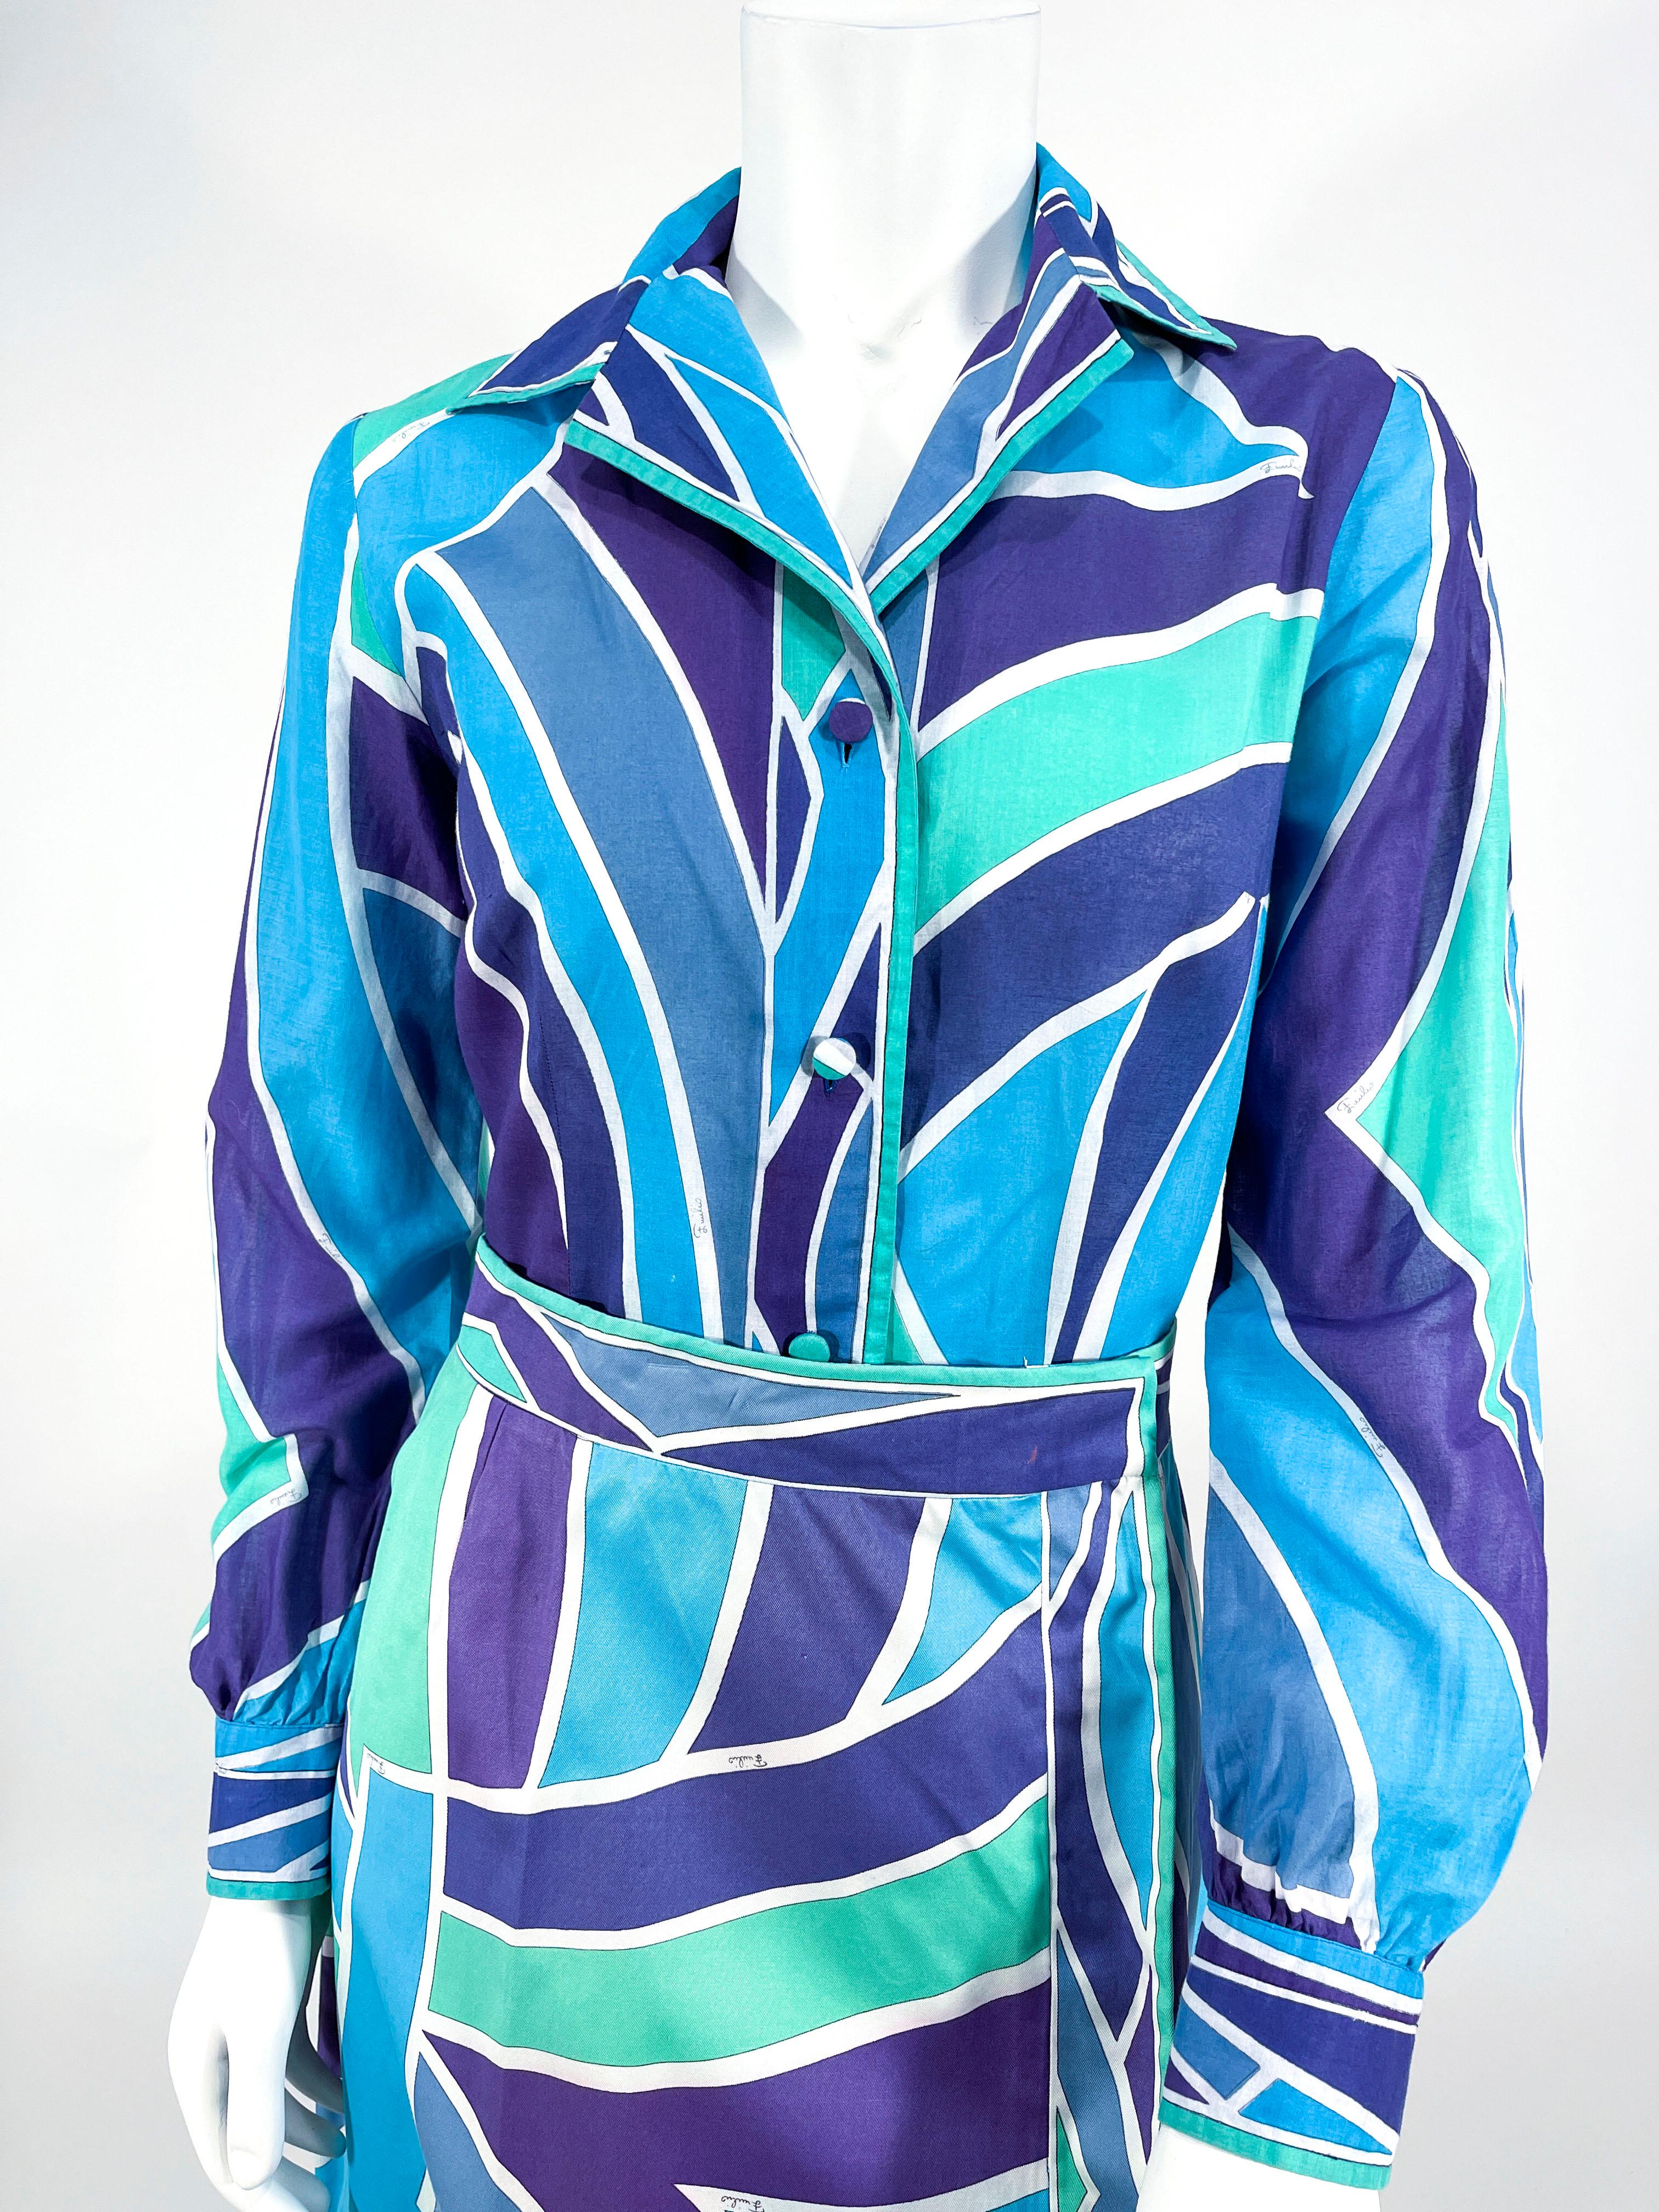 1970s Emilio Pucci geometric printed cotton two-piece set. The geometric printed features jewel tones of violet, blue, green, and whites. The sheer cotton shirt has a butterfly collar with long cuffed sleeves and boarder prints along the edges. The